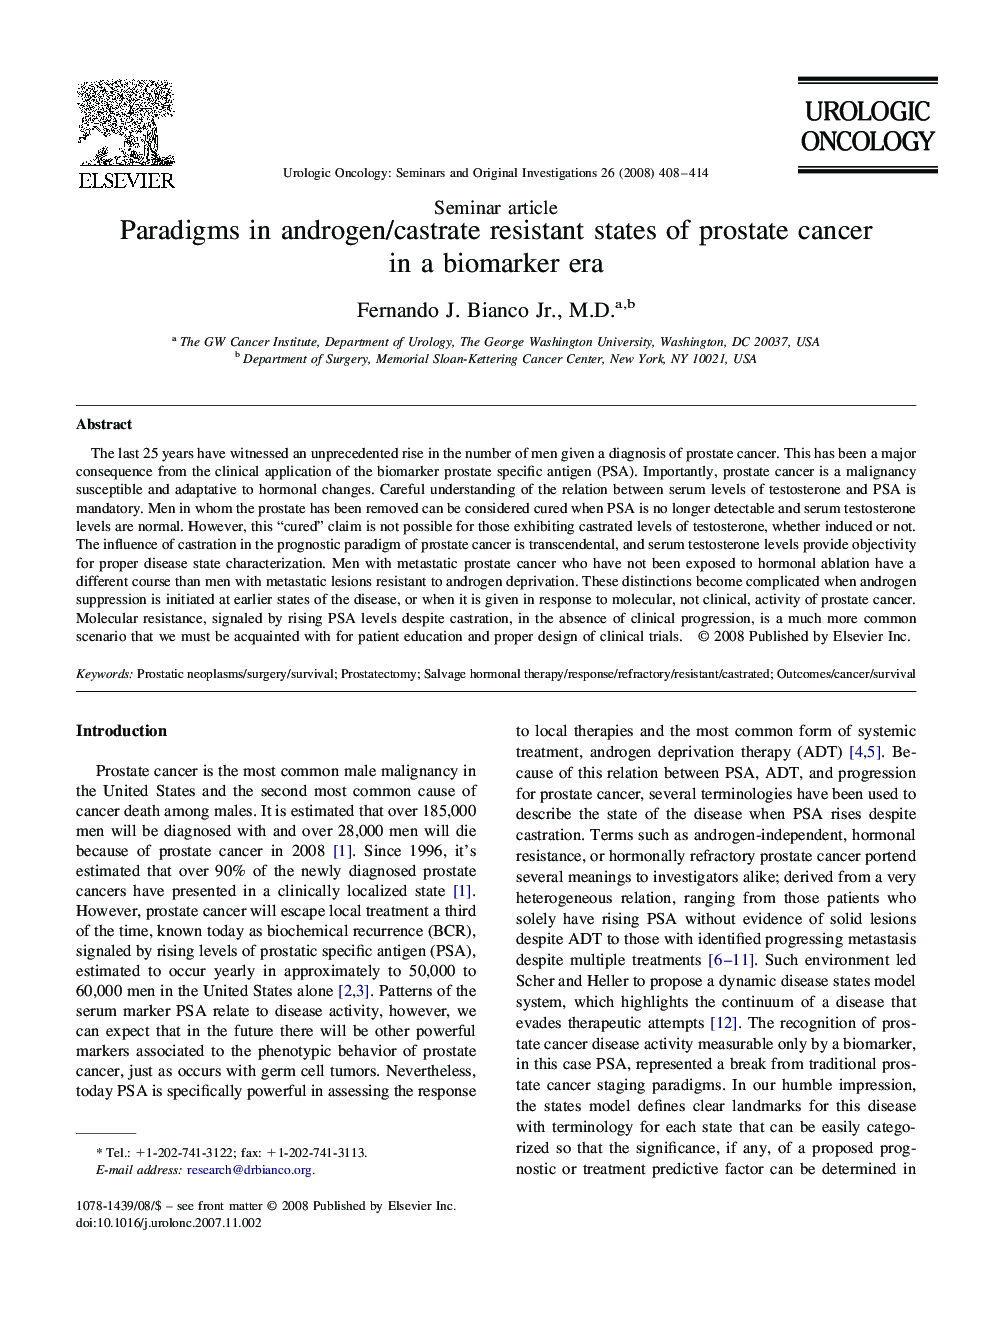 Paradigms in androgen/castrate resistant states of prostate cancer in a biomarker era